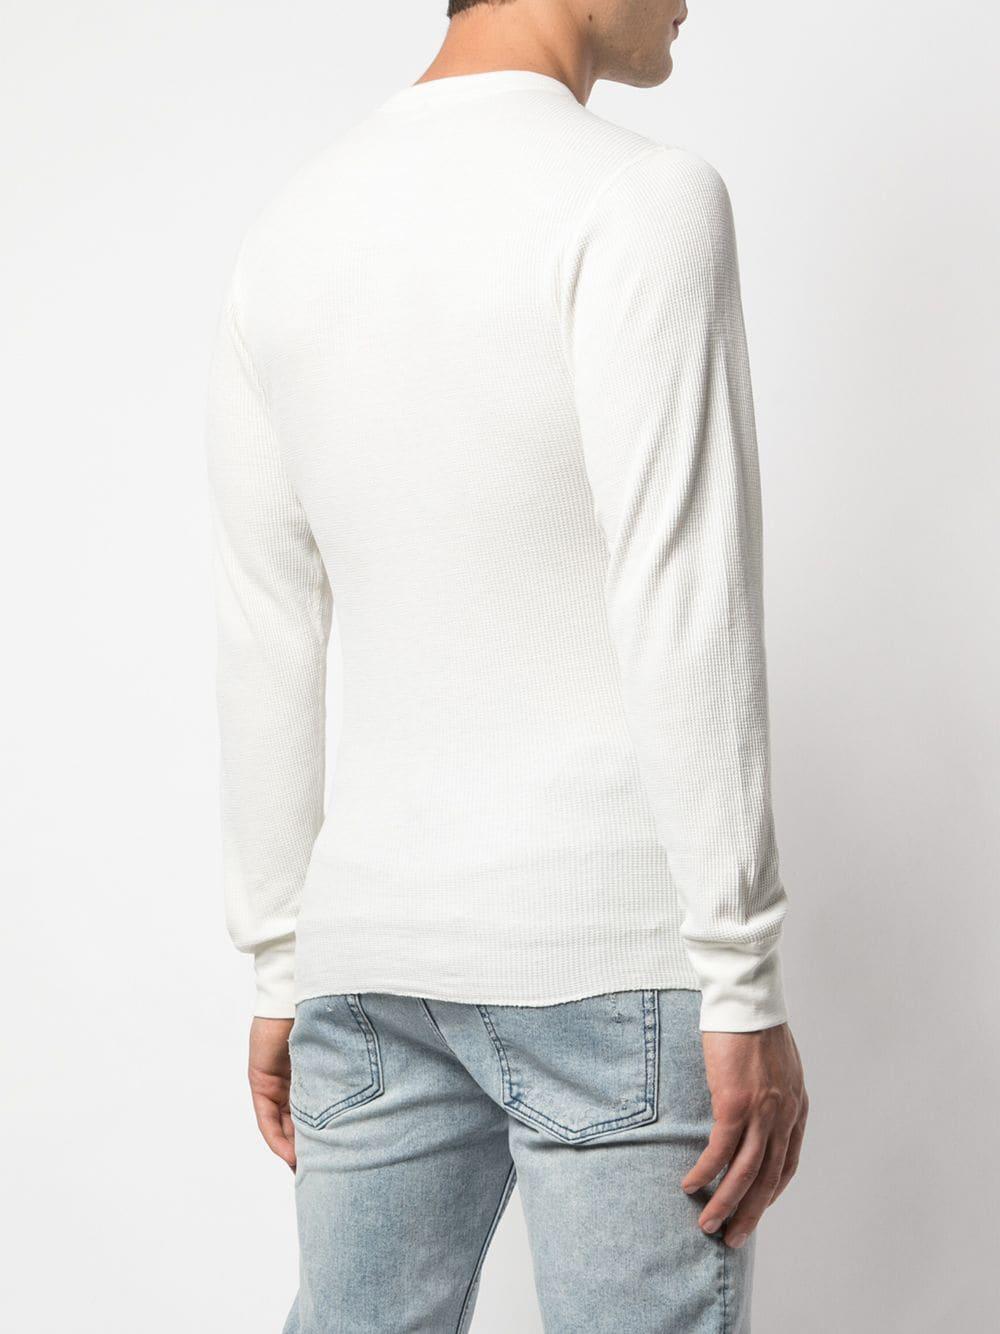 Supreme Hanes Thermal T-shirt in White for Men - Lyst